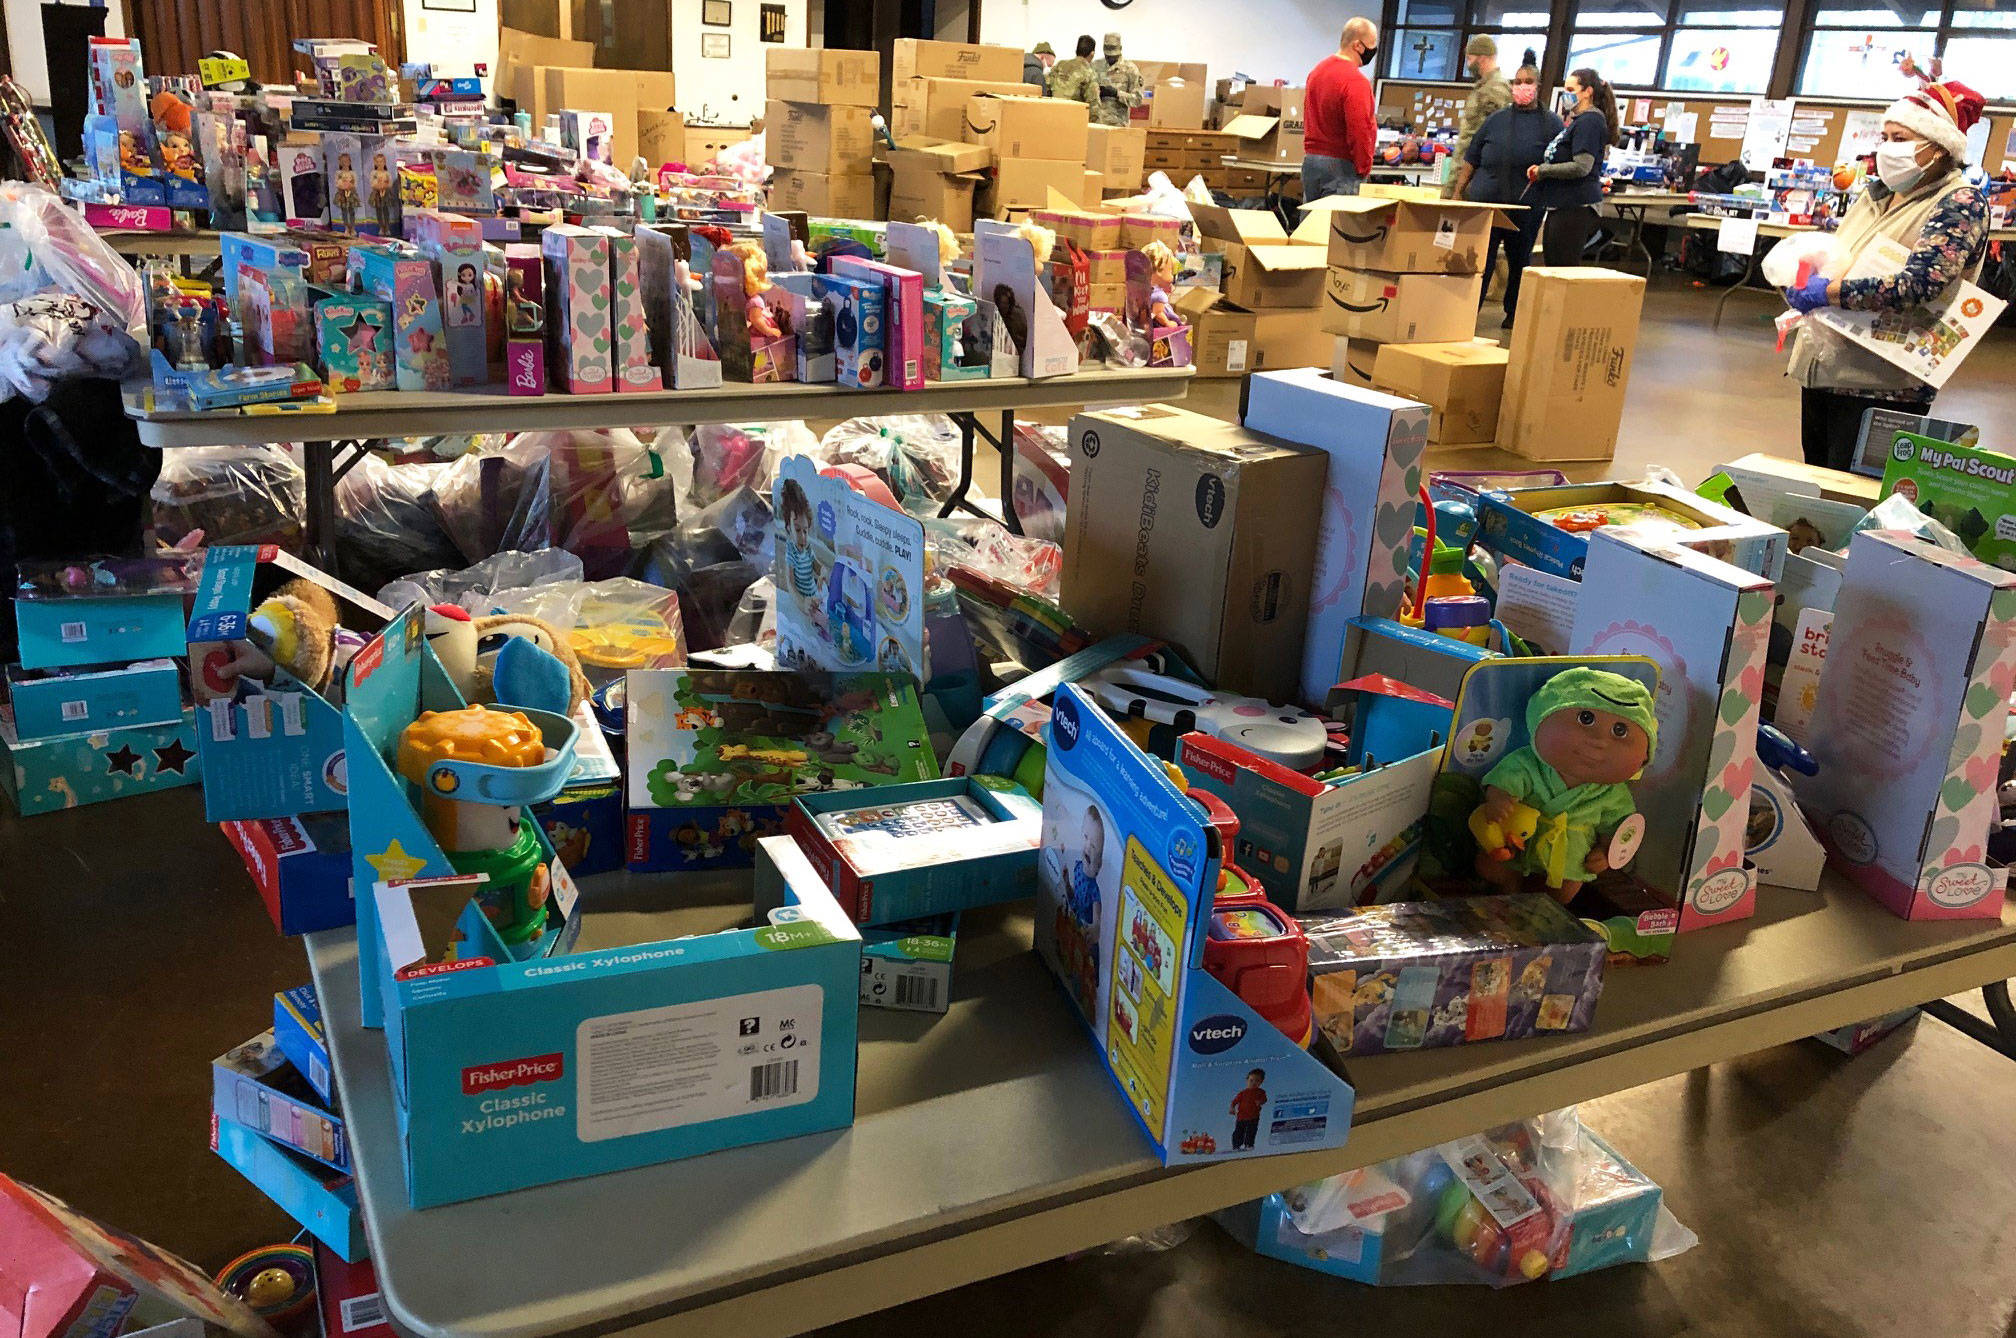 Volunteers dropped off toys Dec. 18 at Kent Lutheran Church from the annual Kent firefighters Toys of Joy drive to be distributed to children through the Kent Food Bank. COURTESY PHOTO, Puget Sound Fire